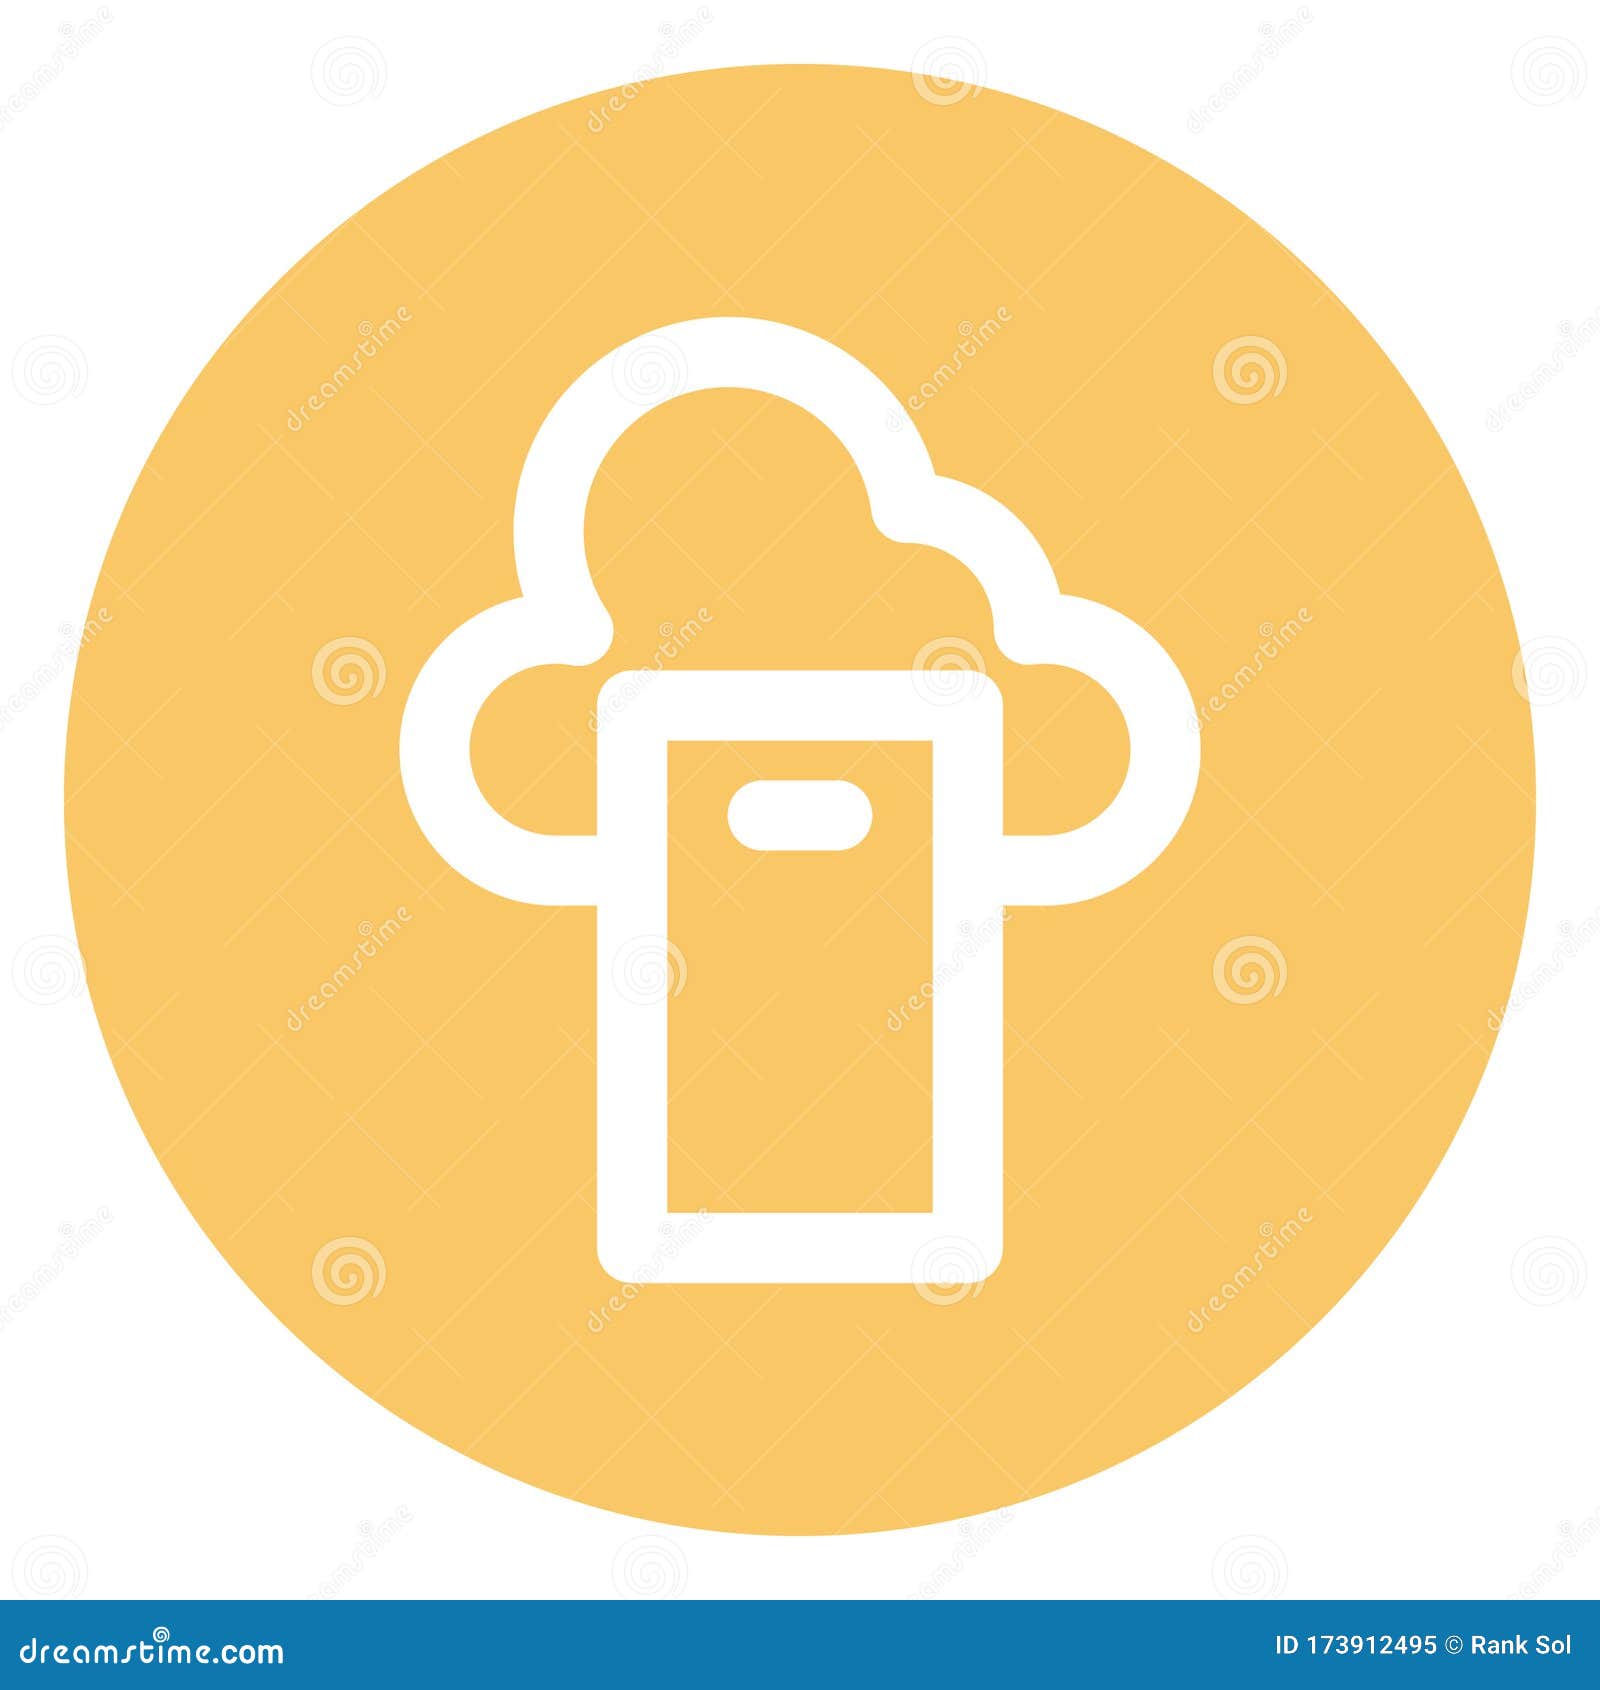 cloud network, icloud bold outline  icon which can easily modified or edited